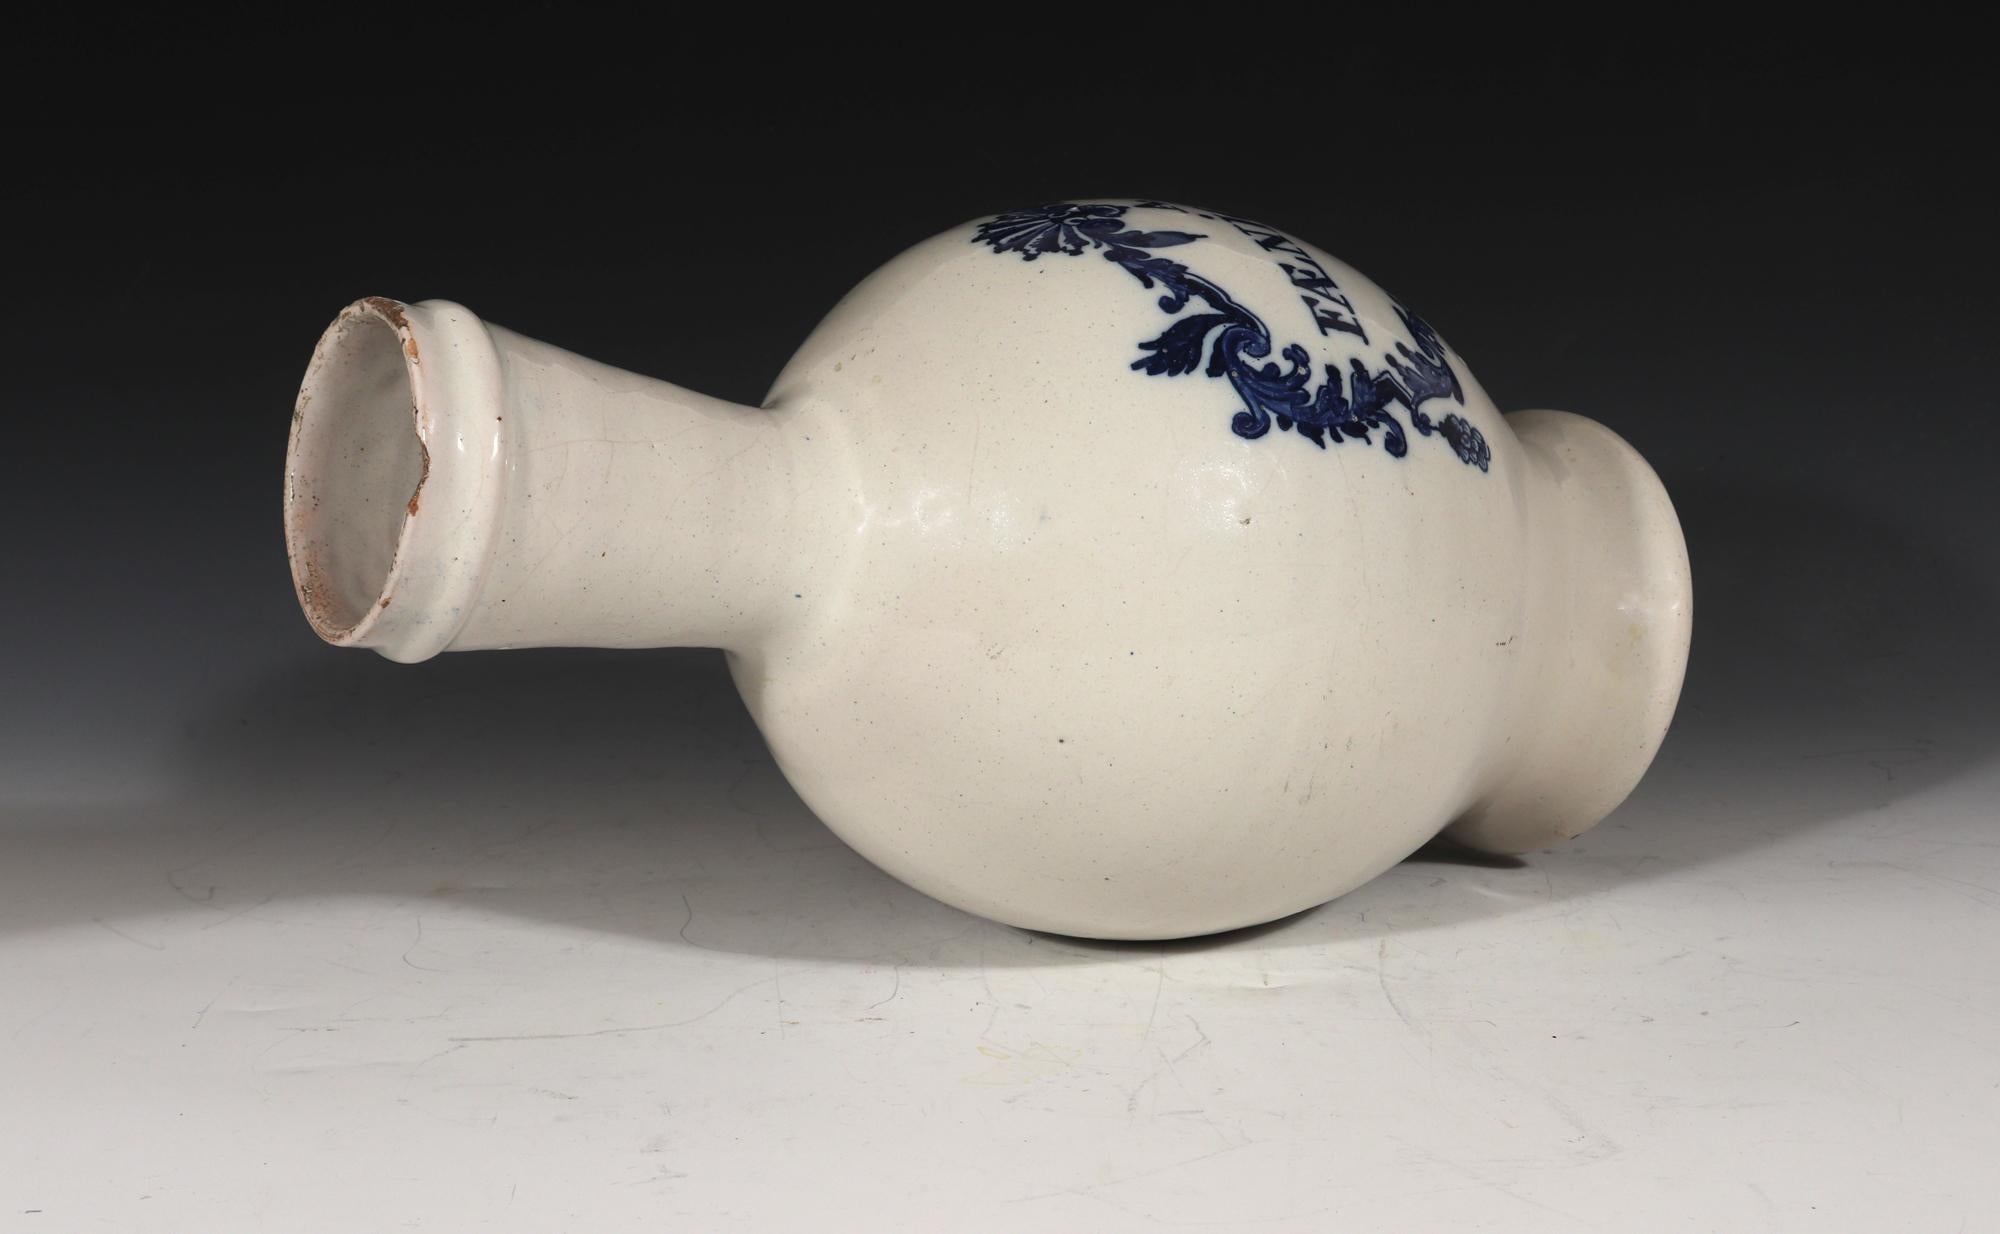 Dutch Delft bottle-shaped wet drug Jar,
Inscribed 'A. FAENICVLI',
Circa 1710-50

The underglaze blue Dutch Delft jar is of a bottle-form. It has an inscription on the front reading 'A. FAENICVLI' within an underglaze blue surround comprised of a